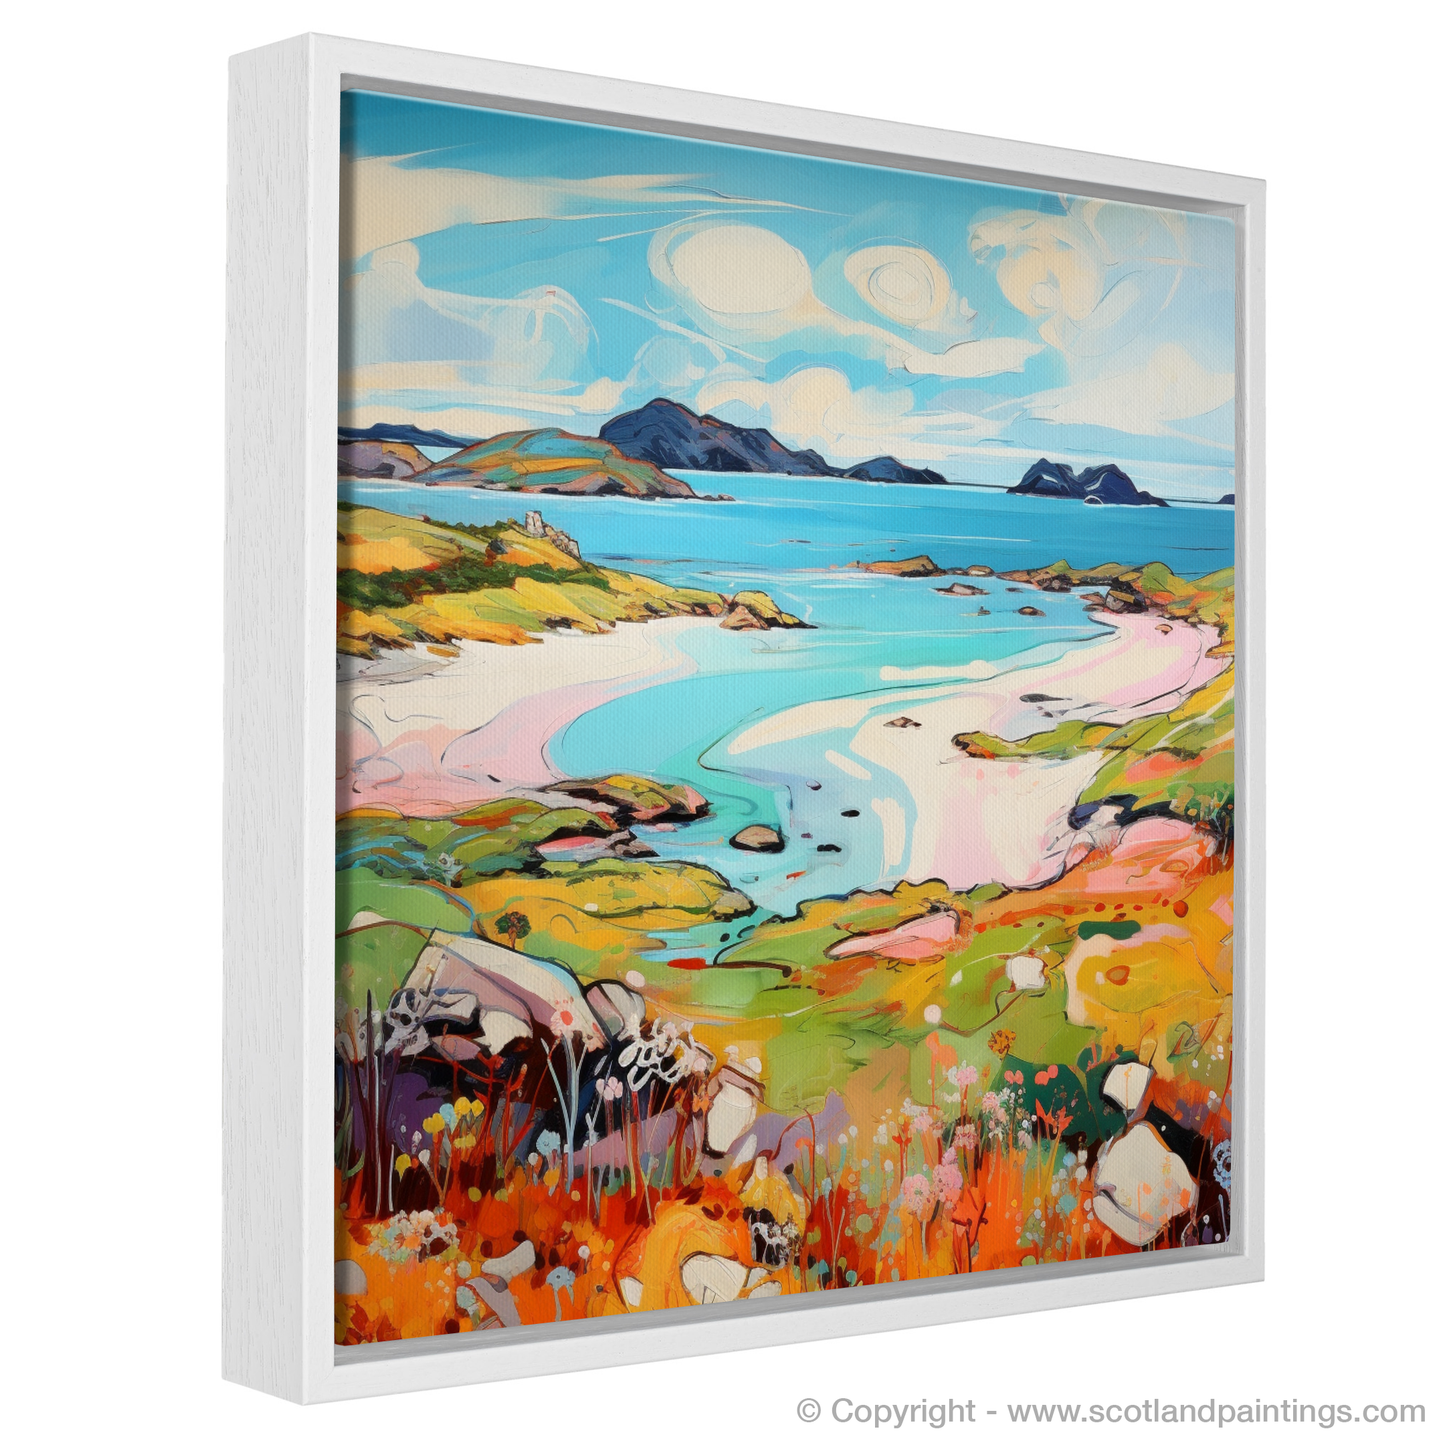 Painting and Art Print of Kiloran Bay, Isle of Colonsay in summer entitled "Kiloran Bay Summer Fauvist Reverie".